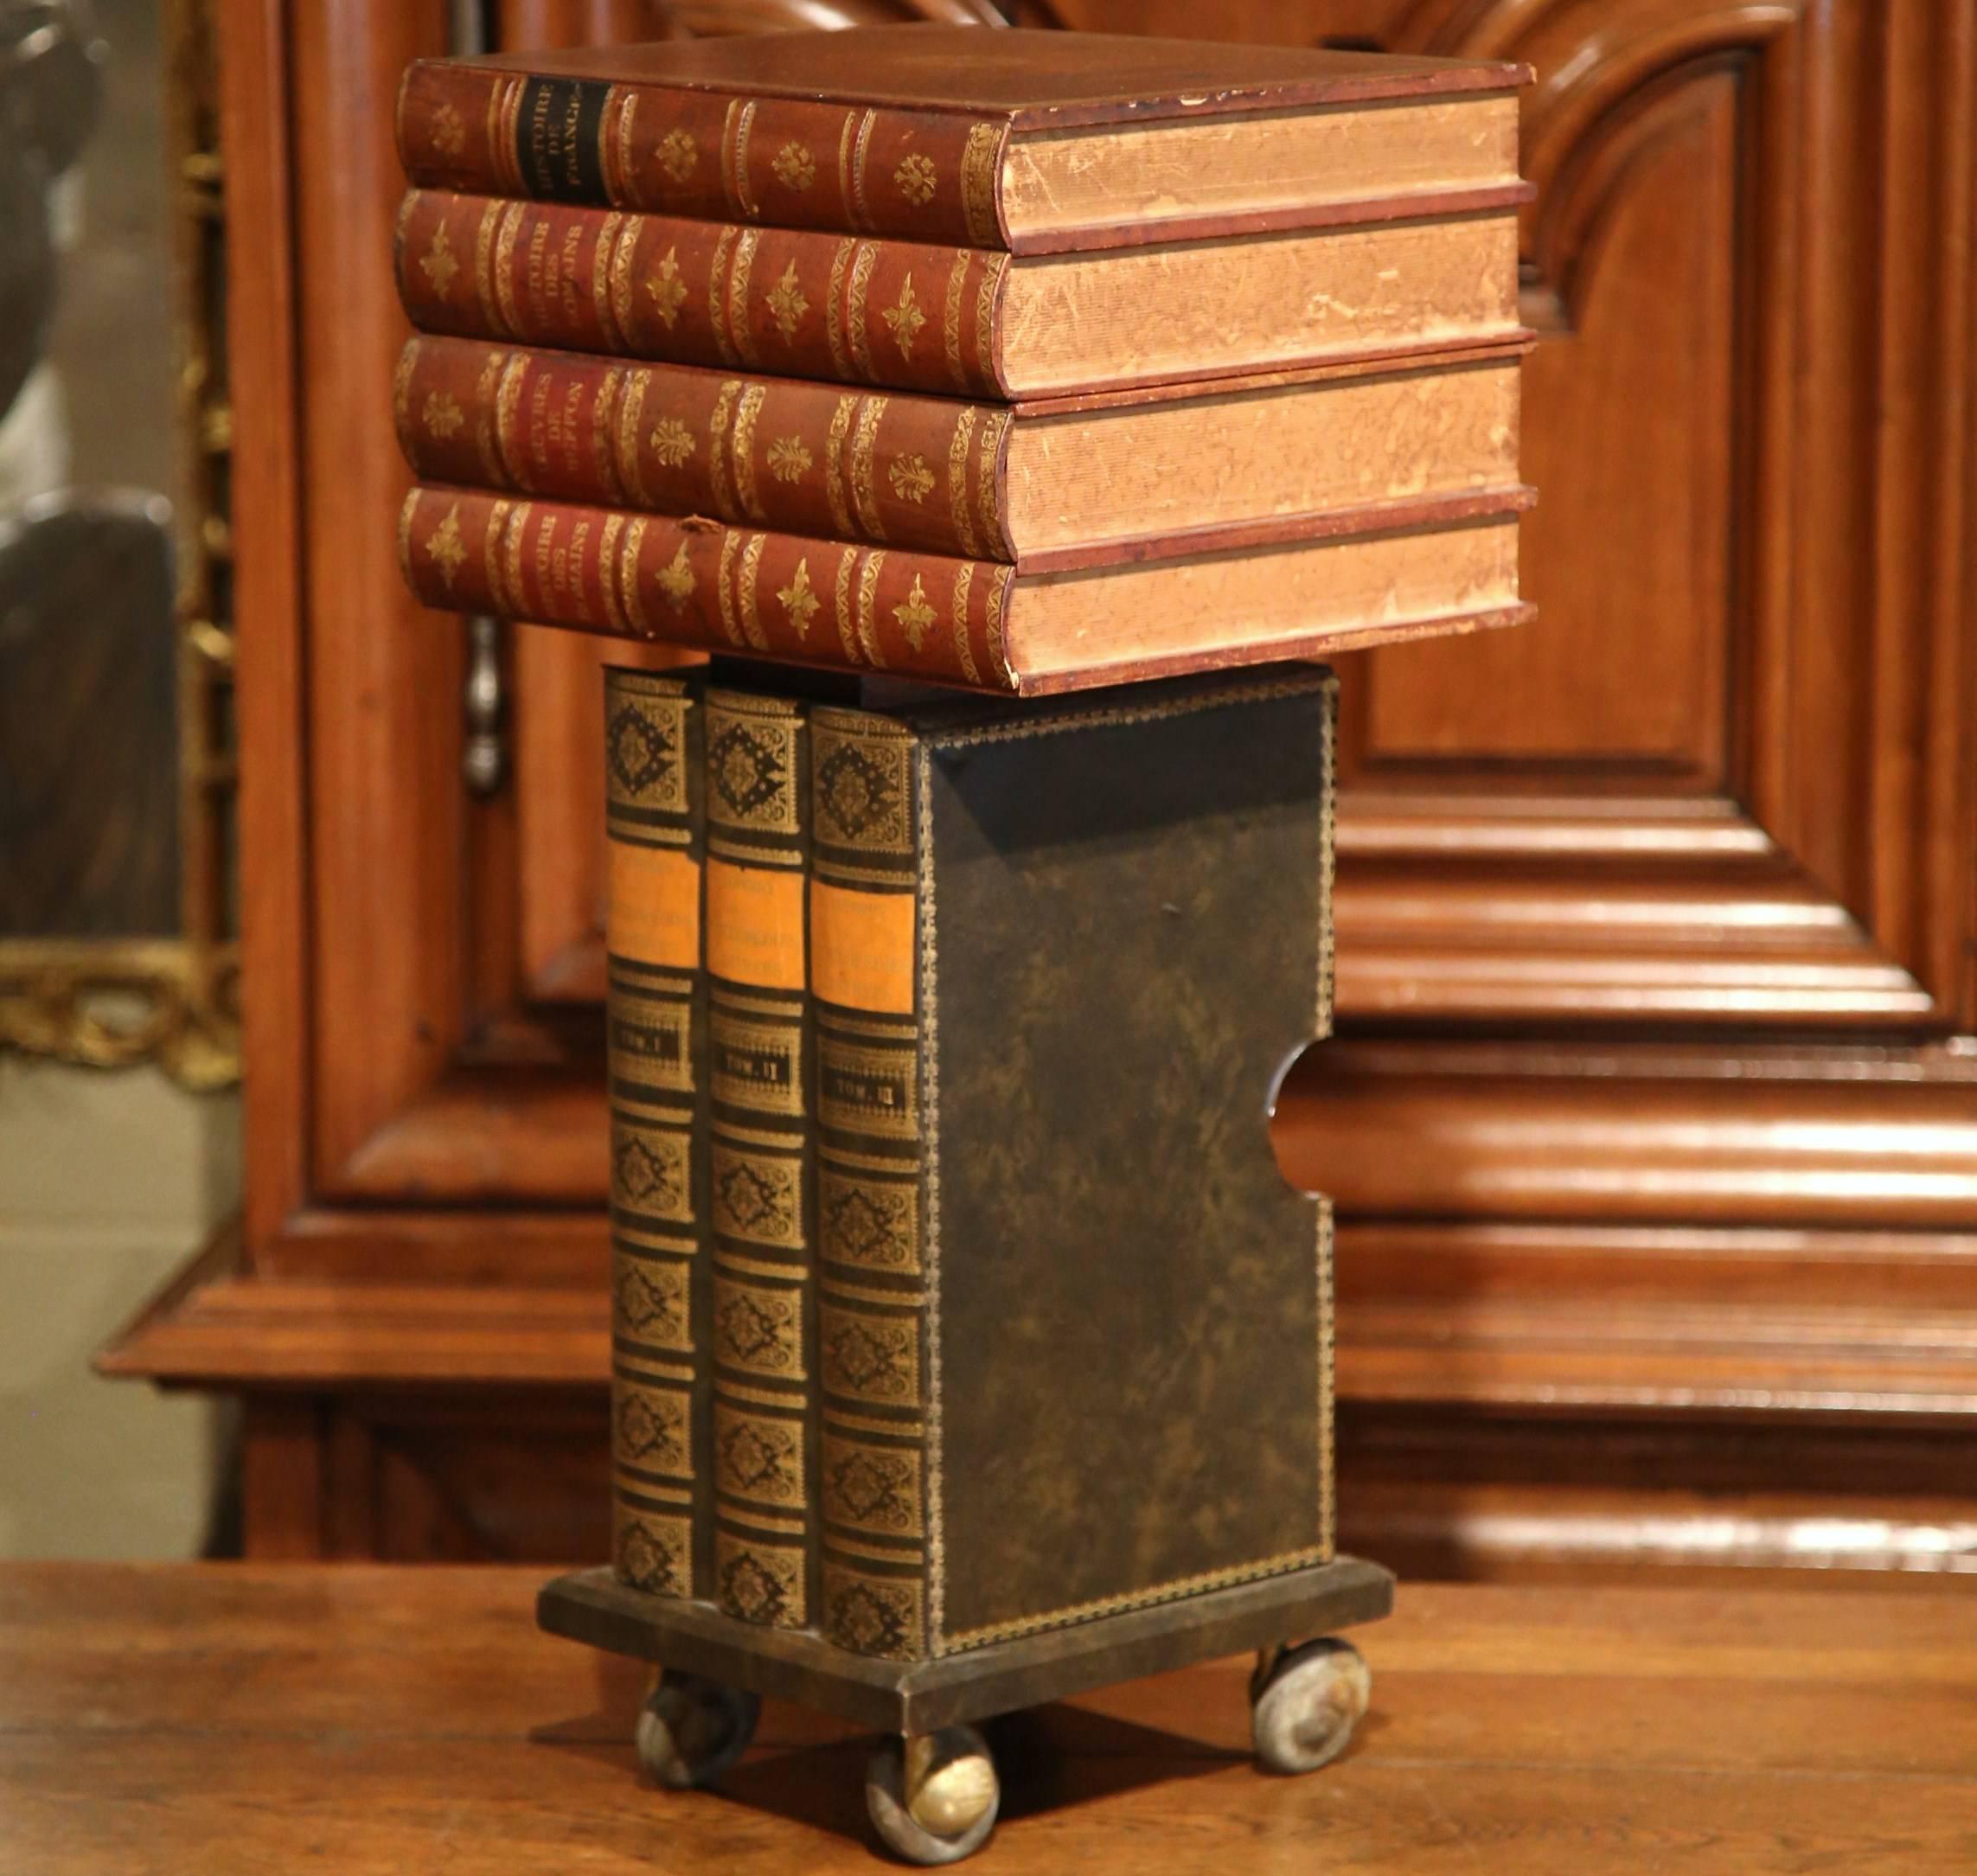 Start a conversation with this interesting, vintage side table. Crafted in France circa 1960, this small table on wheels resembles a stack of antique books. The functional, mobile storage solution has seven lookalike books, a drawer and an open top